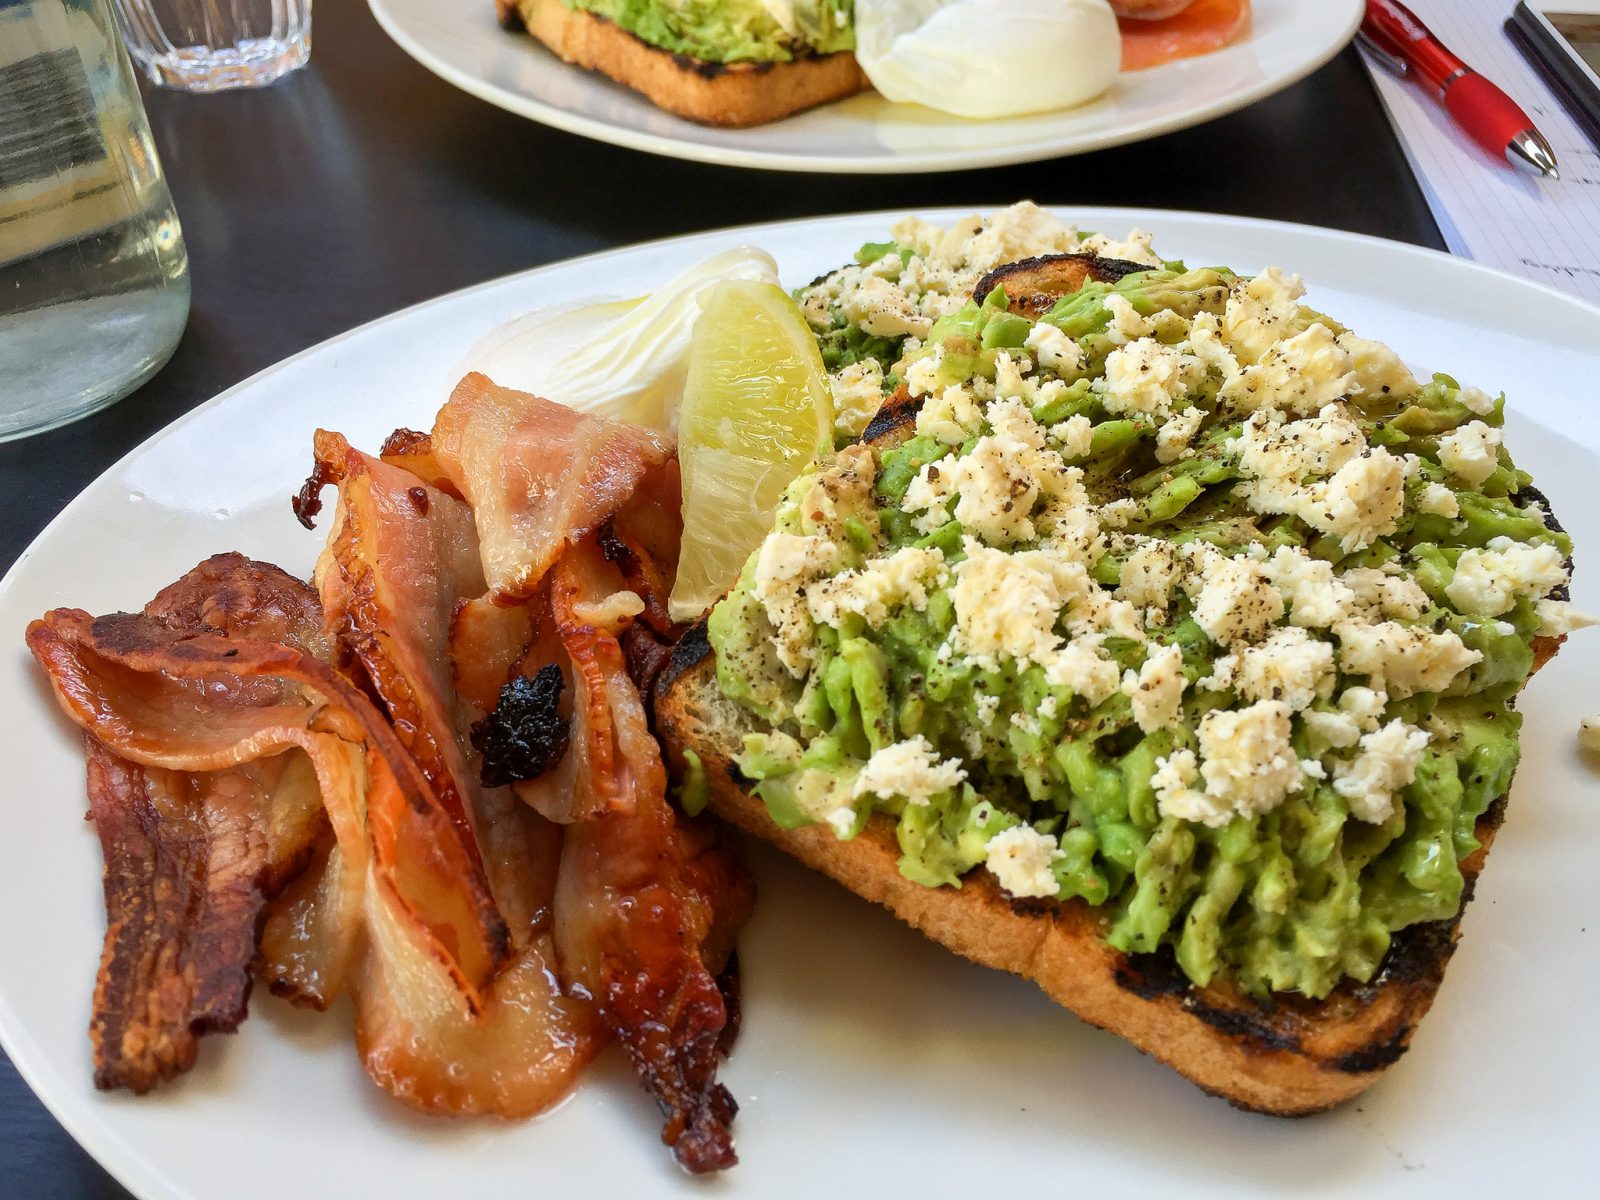 Smashed avocado on toast at Speakeasy in South Yarra. Photo by Katherine Lim via Flickr CC